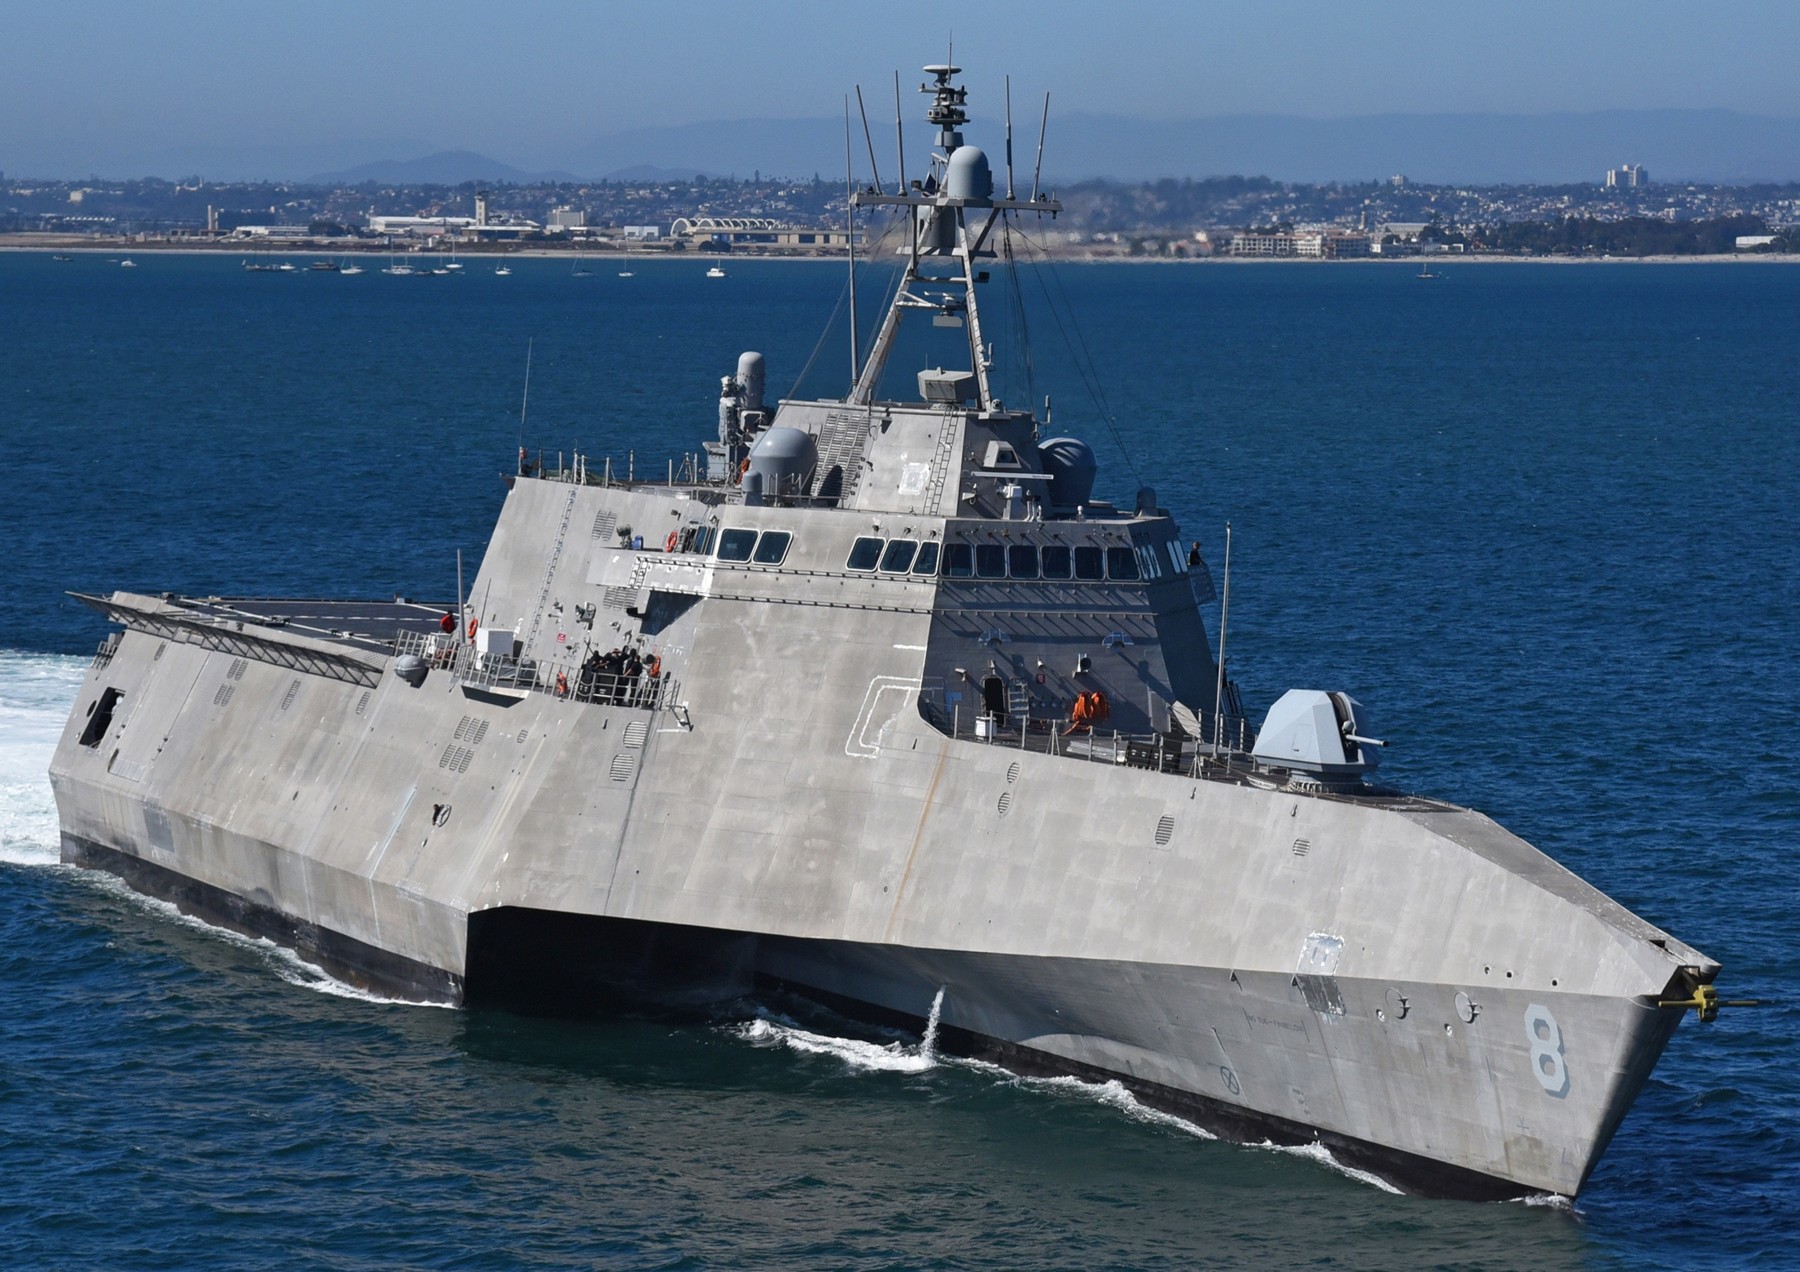 lcs-8 uss montgomery independence class littoral combat ship us navy 46